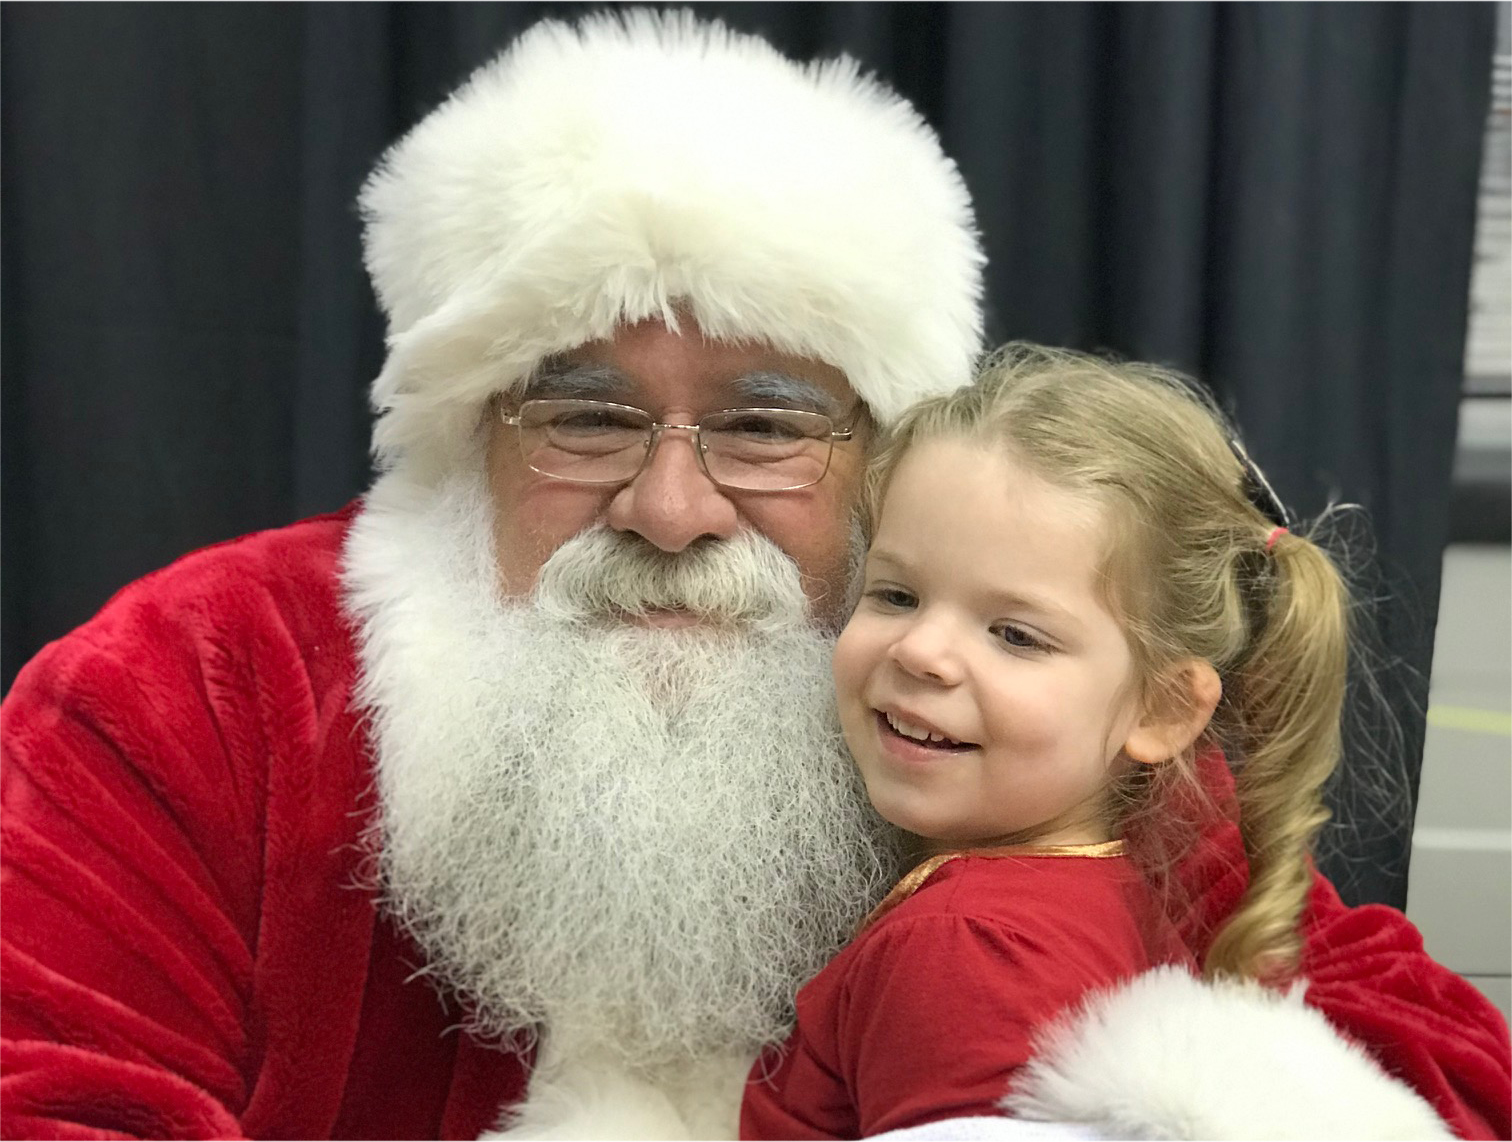 Santa with child on his lap